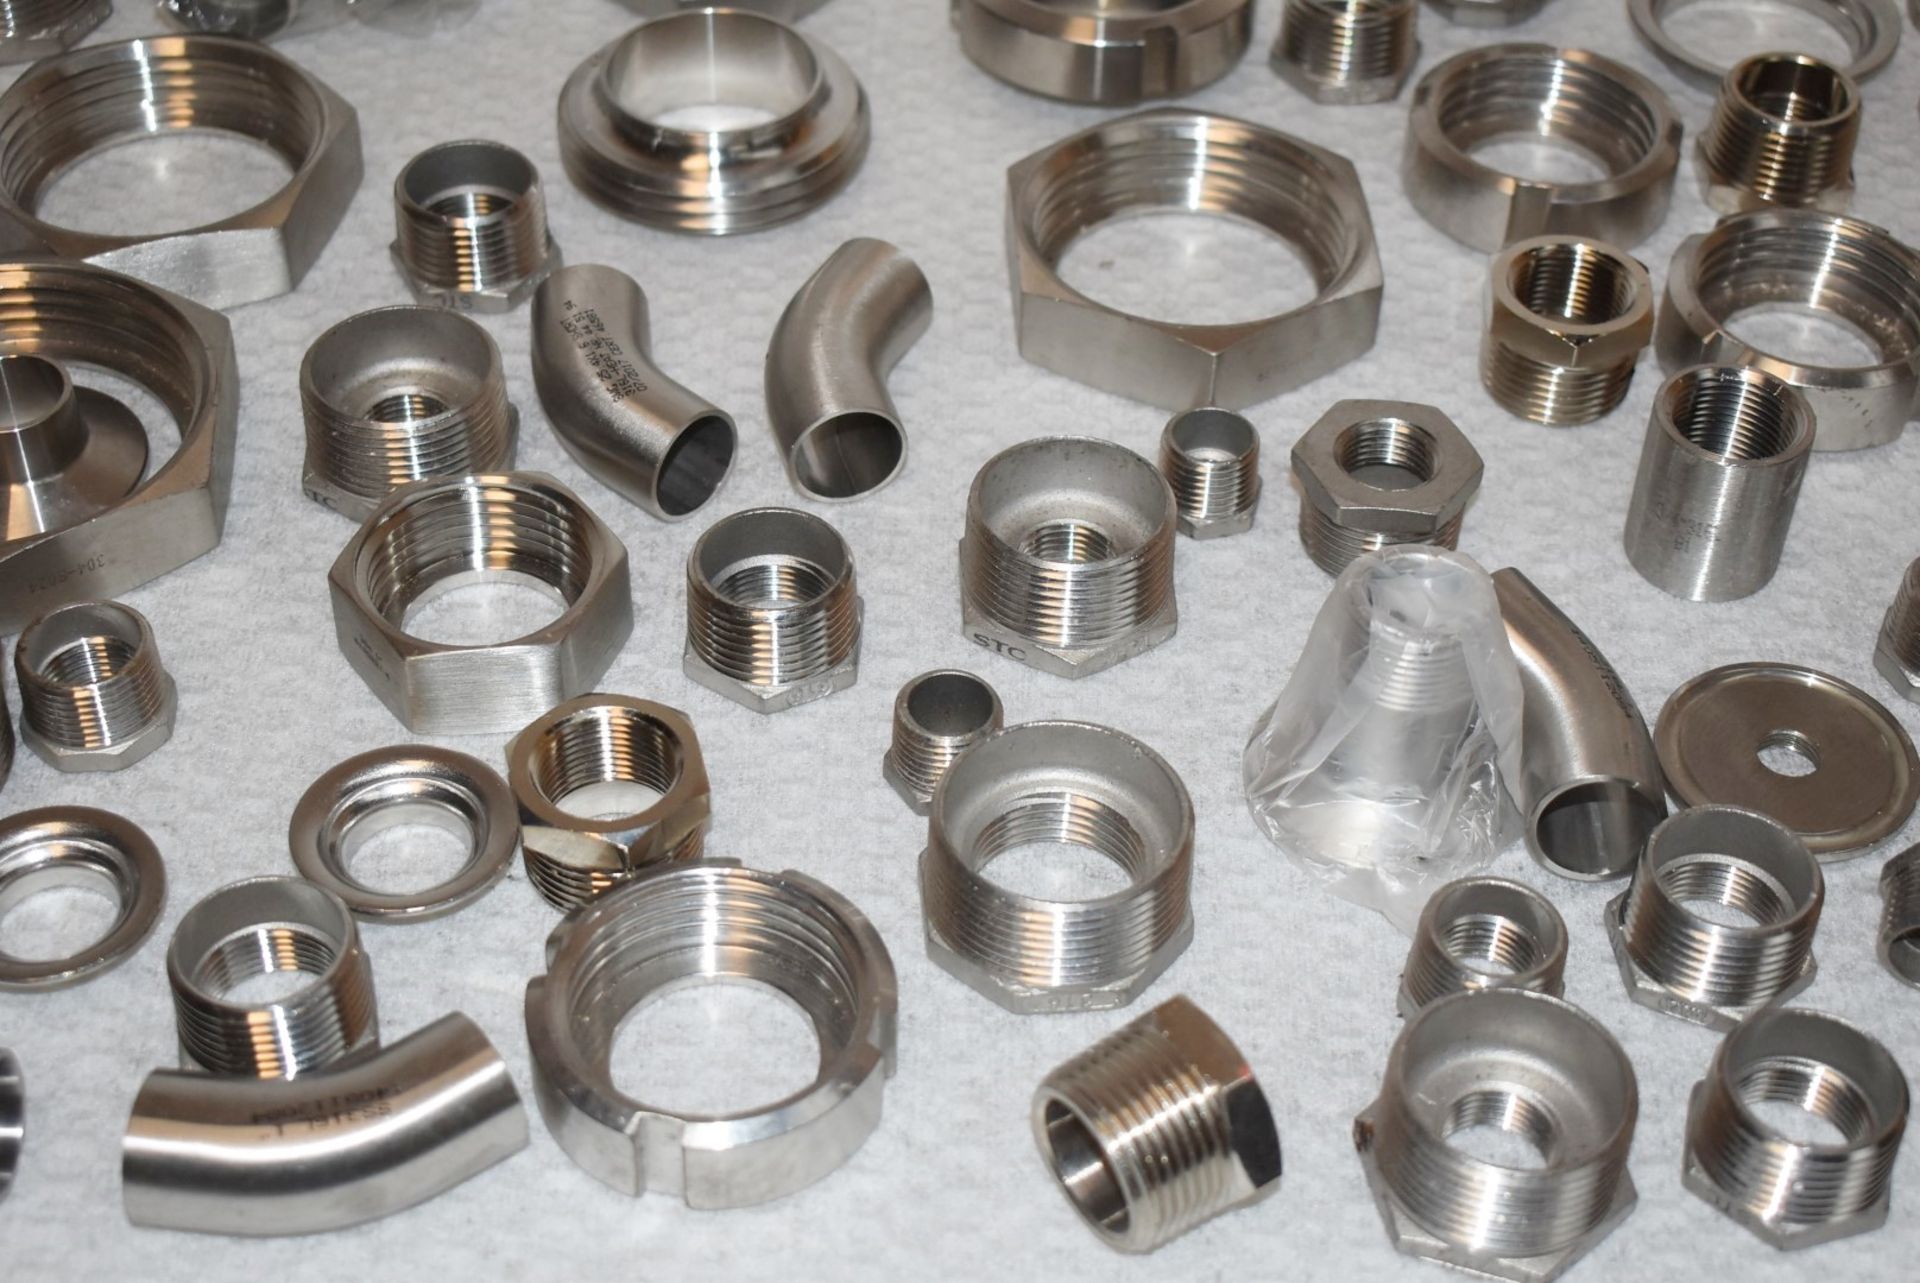 Assorted Job Lot of Stainless Steel Fittings For Brewery Equipment - Includes Approx 60 Pieces - - Image 7 of 11